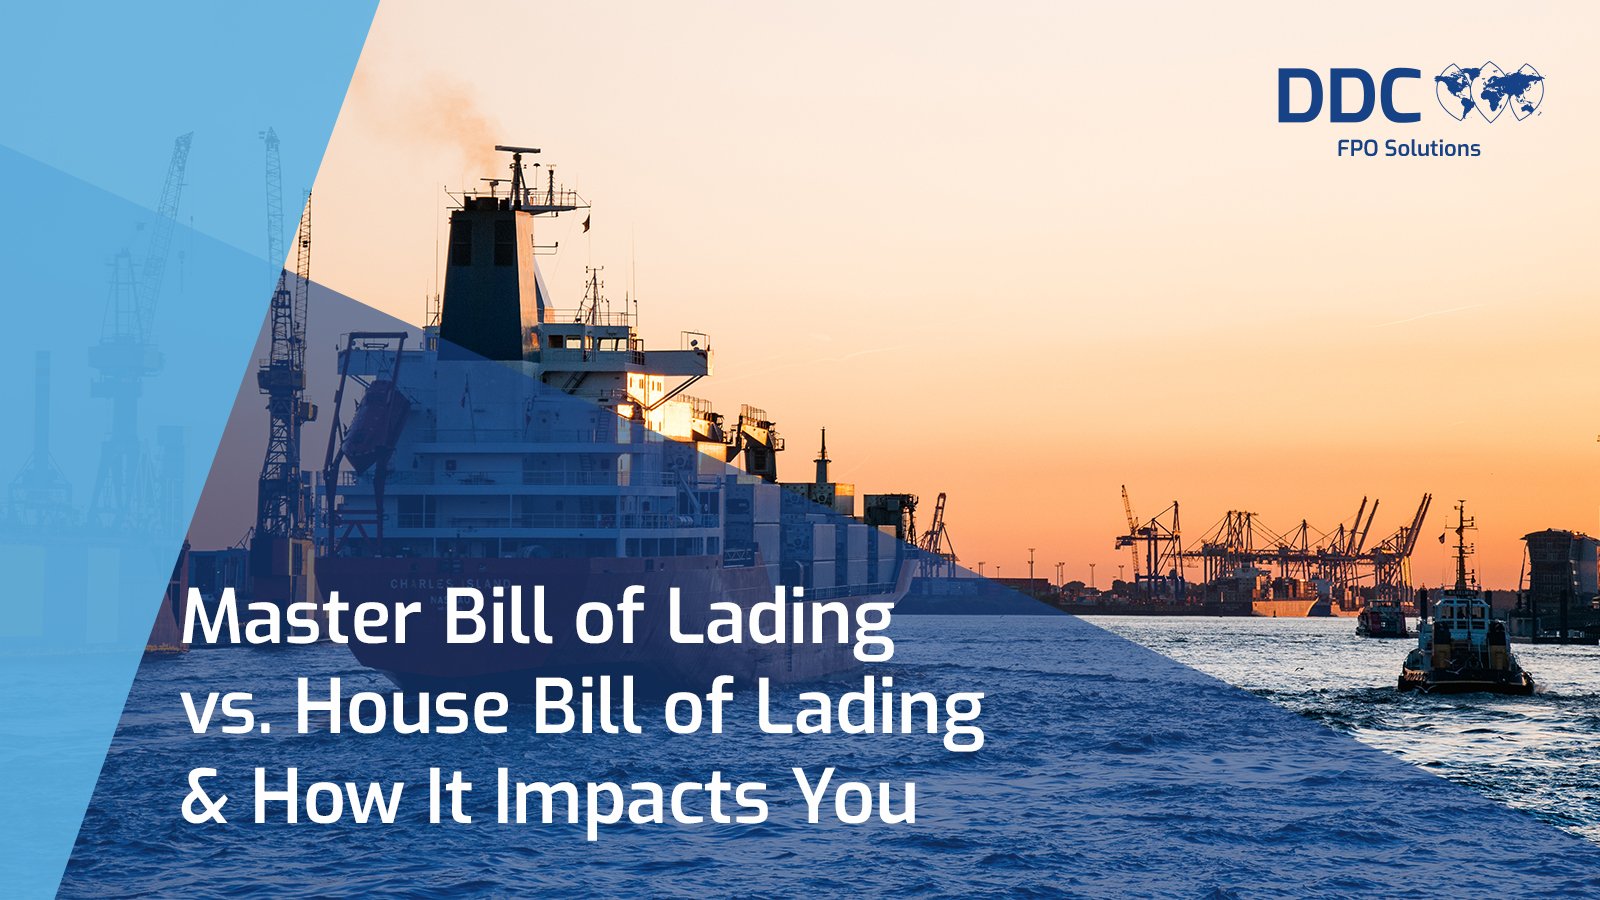 Master Bill of Lading vs. House Bill of Lading & How It Impacts You